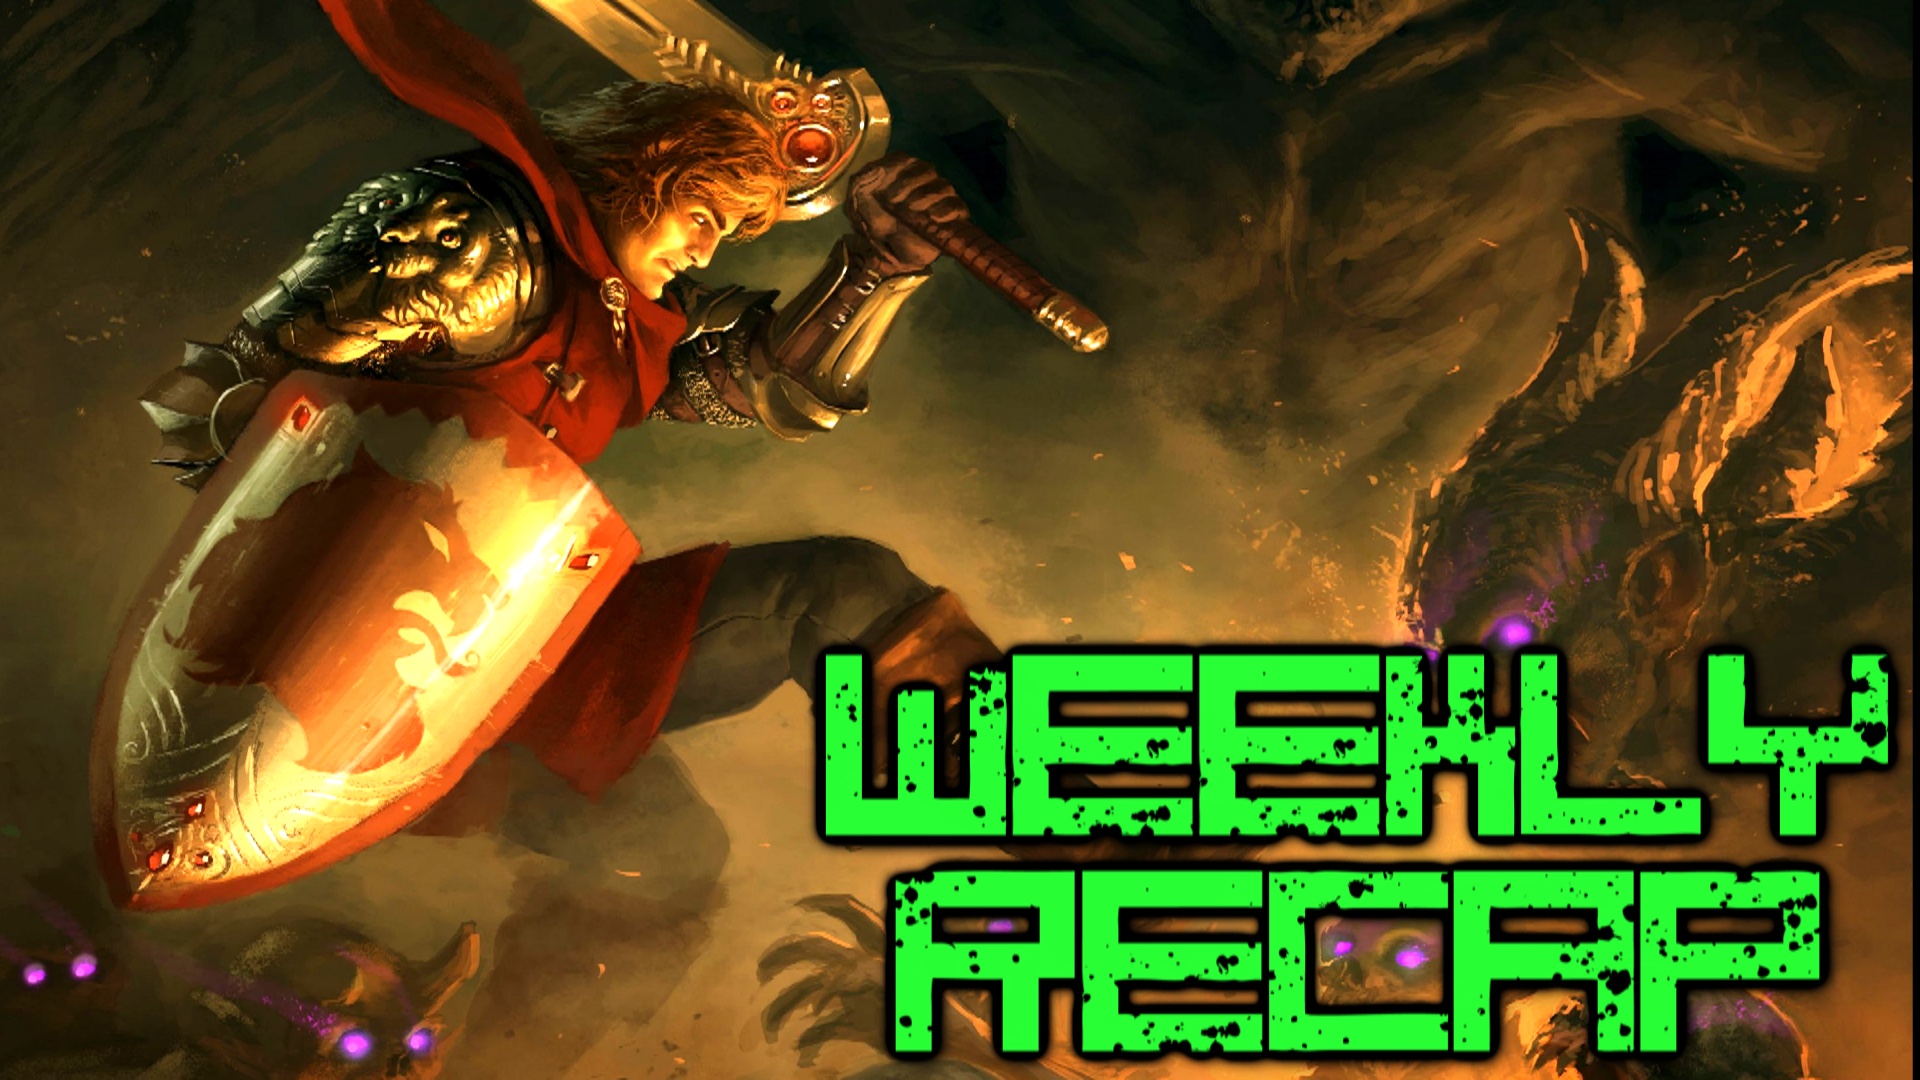 MMOHuts Weekly Recap #275 Feb. 1st - MXM, Riders of Icarus, Crossout & More!